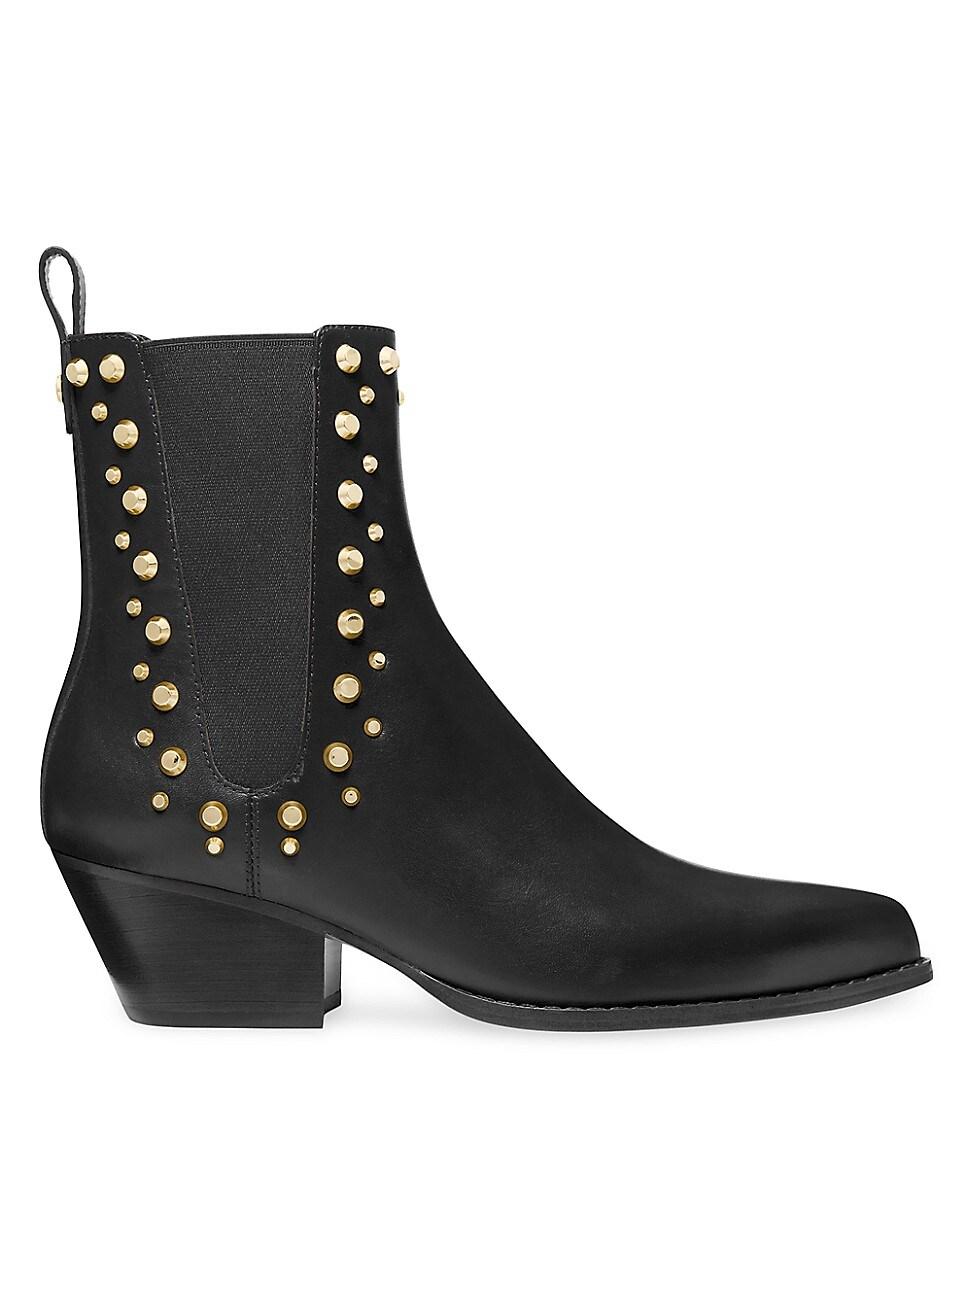 MICHAEL Michael Kors Kinlee 50mm Studded Leather Ankle Booties in Black ...